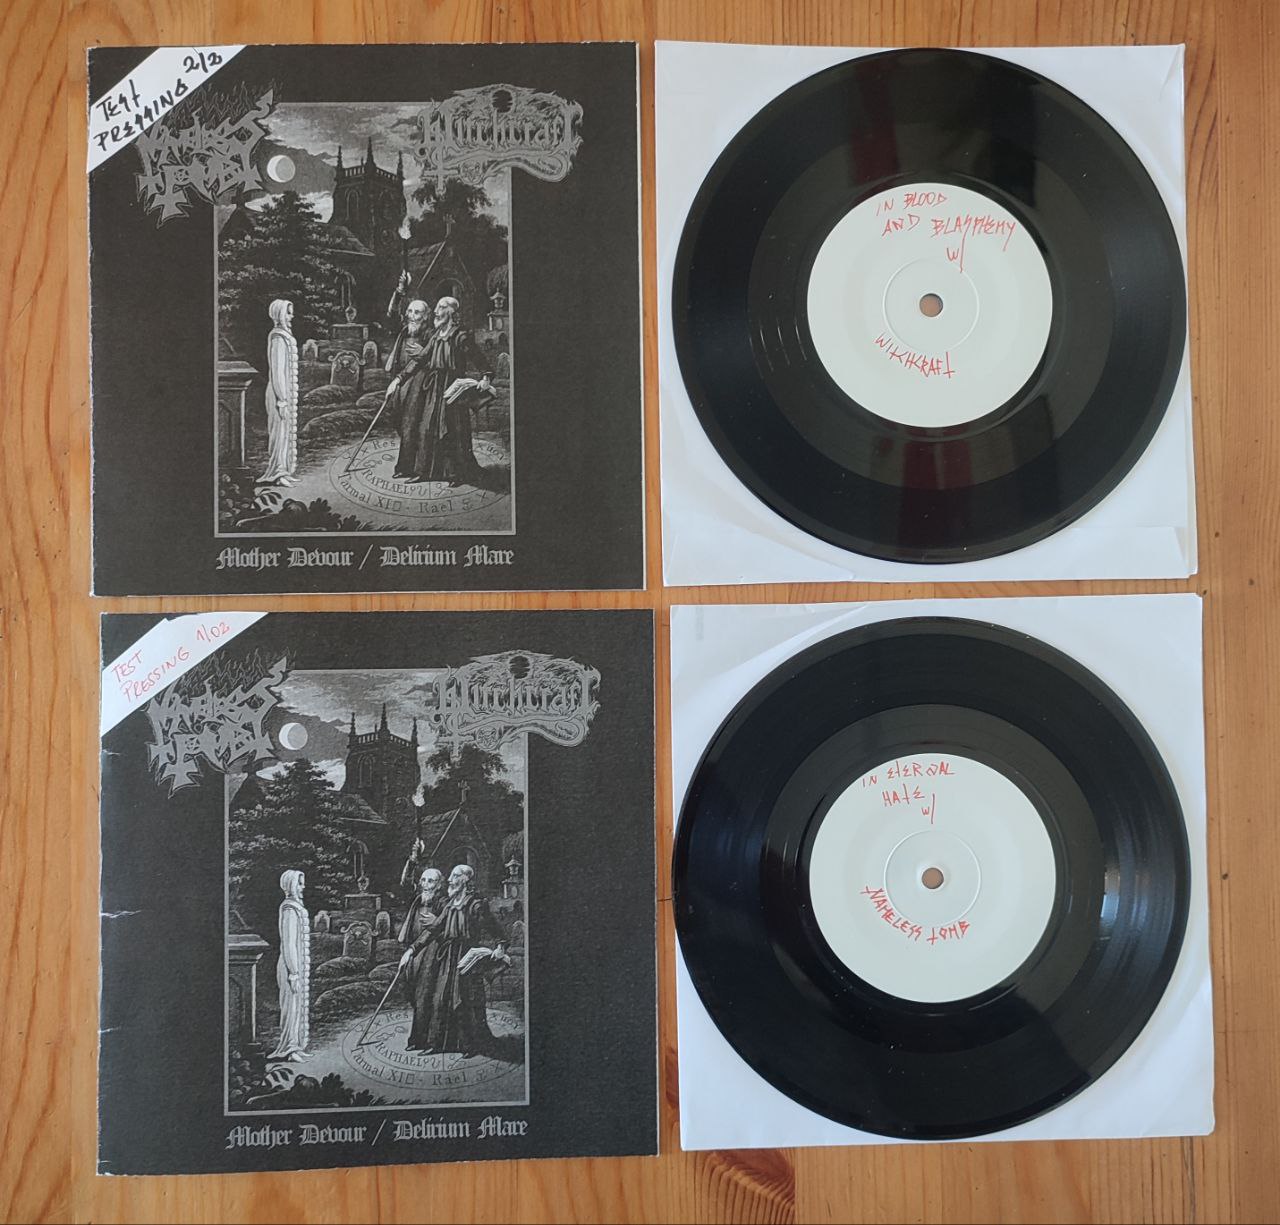 TEST PRESSING: Nameless Tomb (Ger) / Witchcraft (Fin) - 7" split *LIMITED TO 2 COPIES*